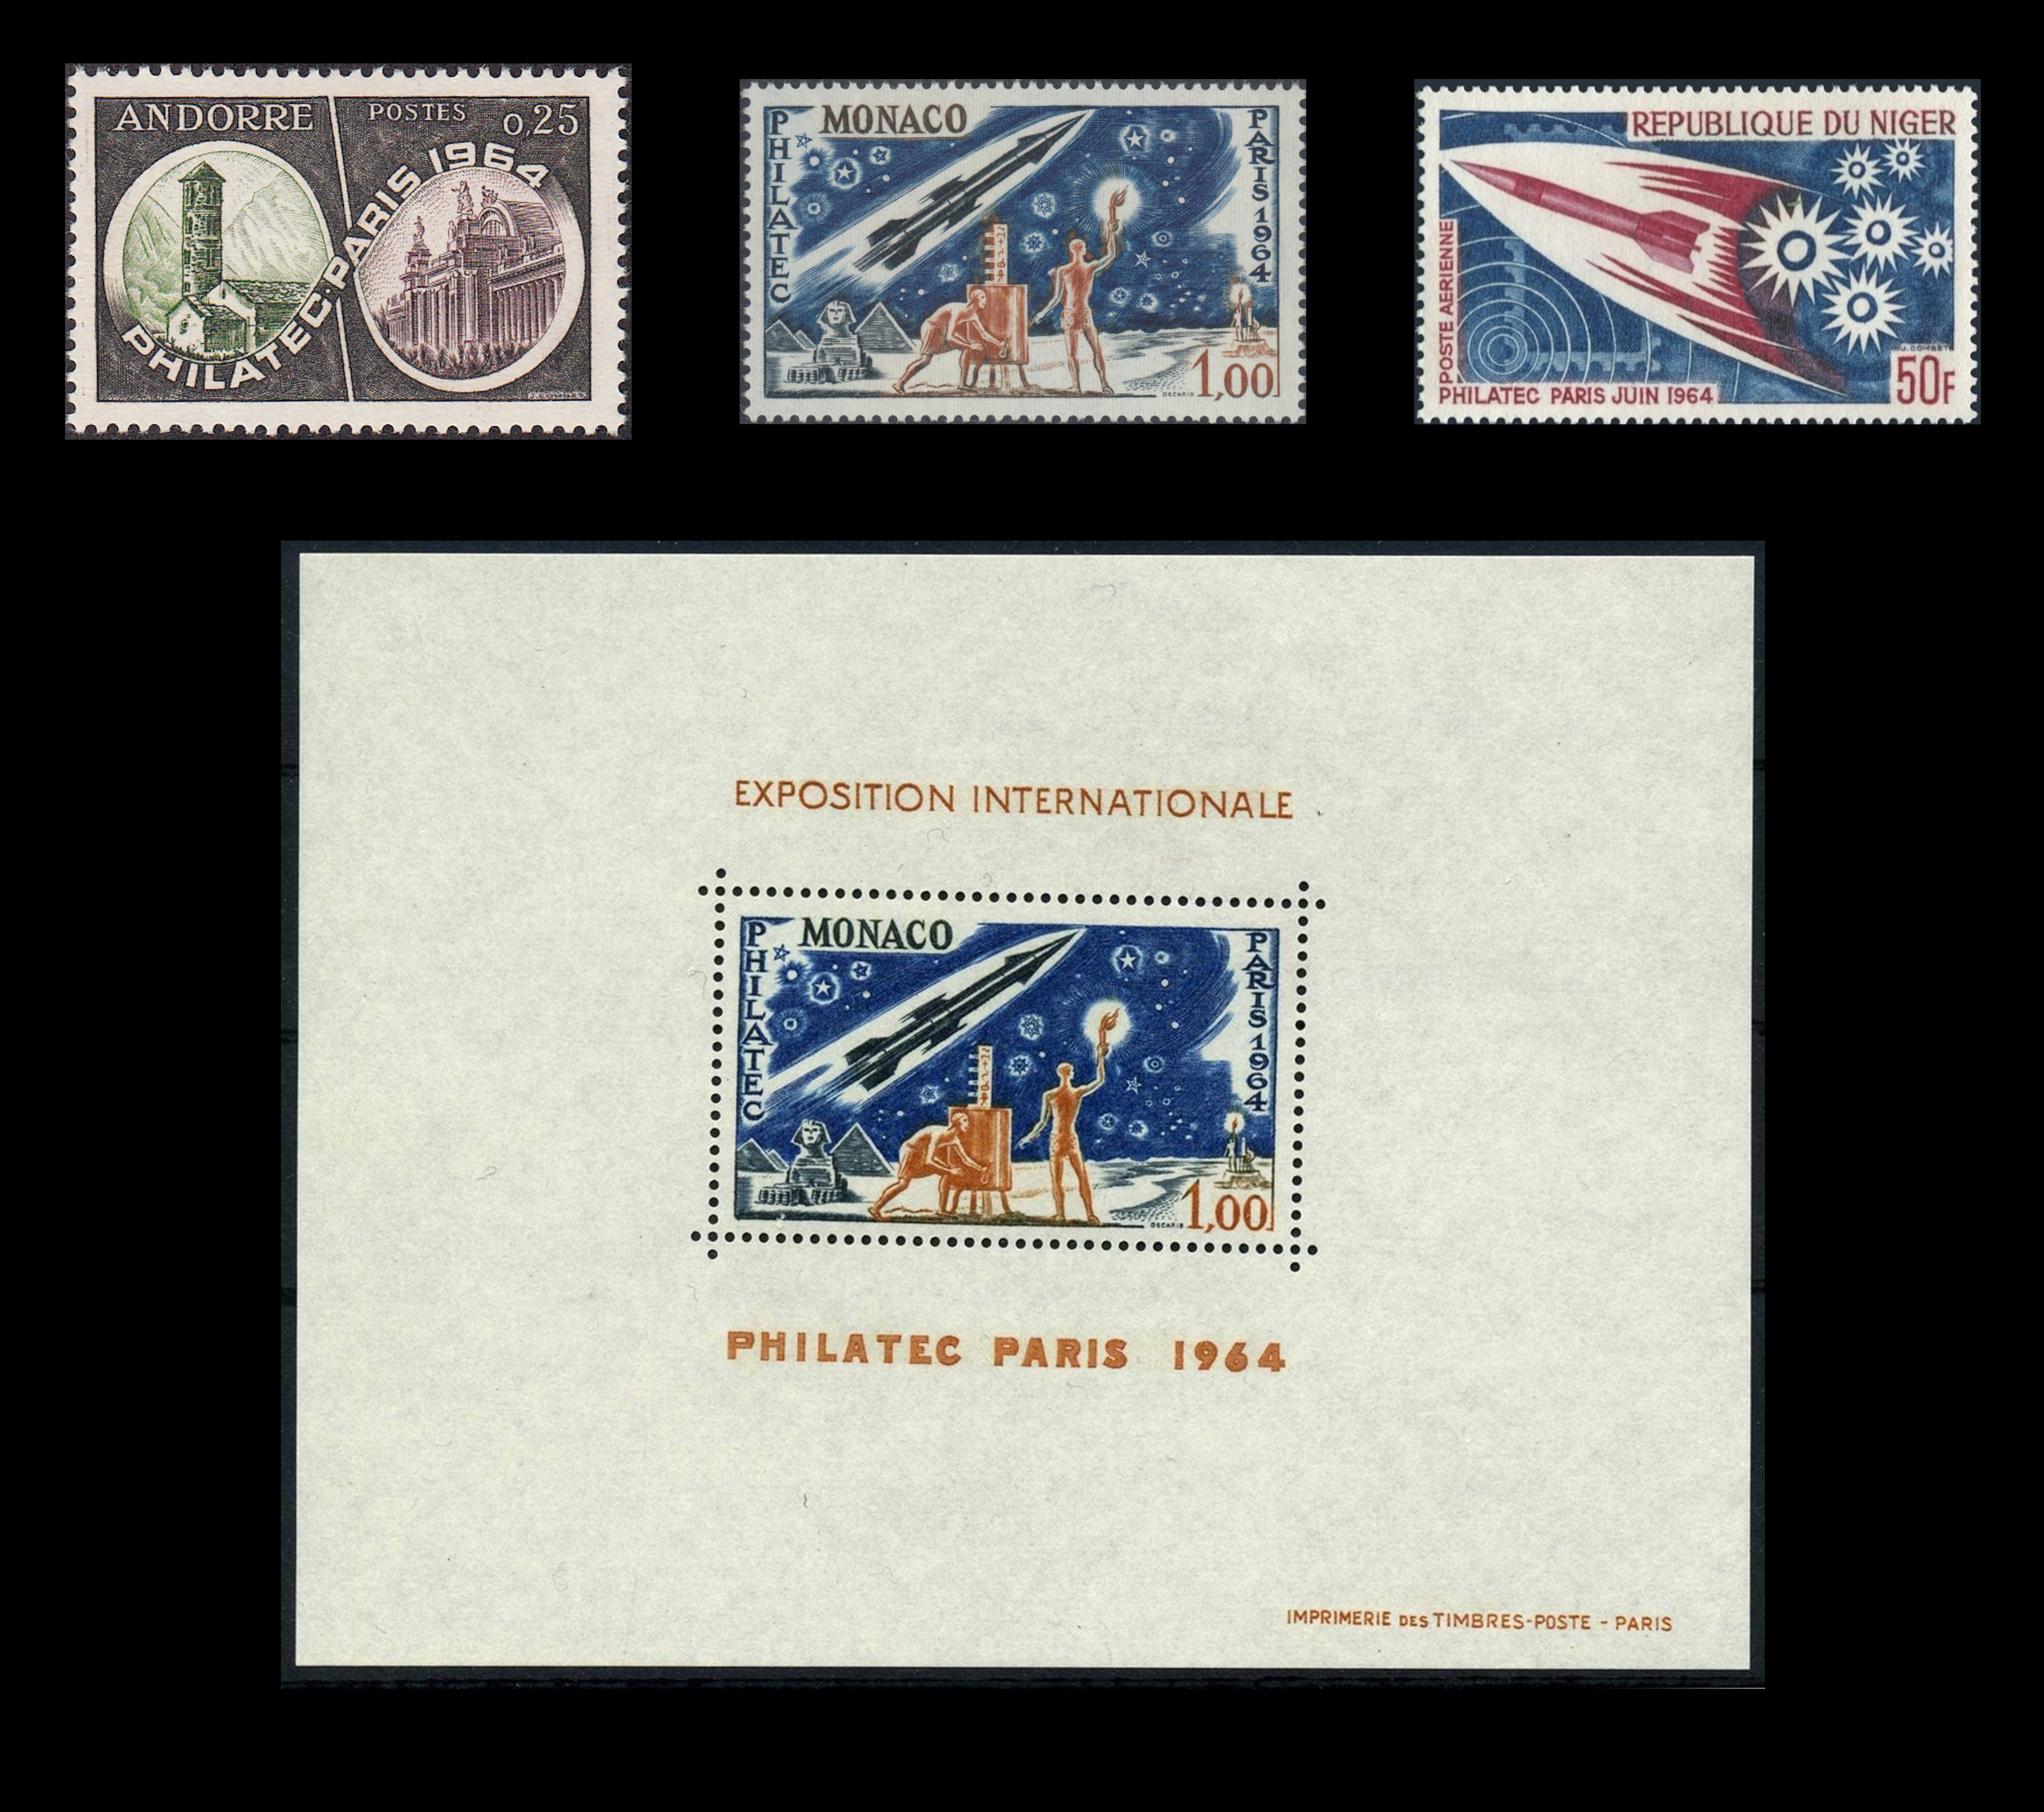 Stamps of Andorra, Monaco (with miniature sheet) and Niger released to mark the PHILATEC stamp exhibition in 1964.